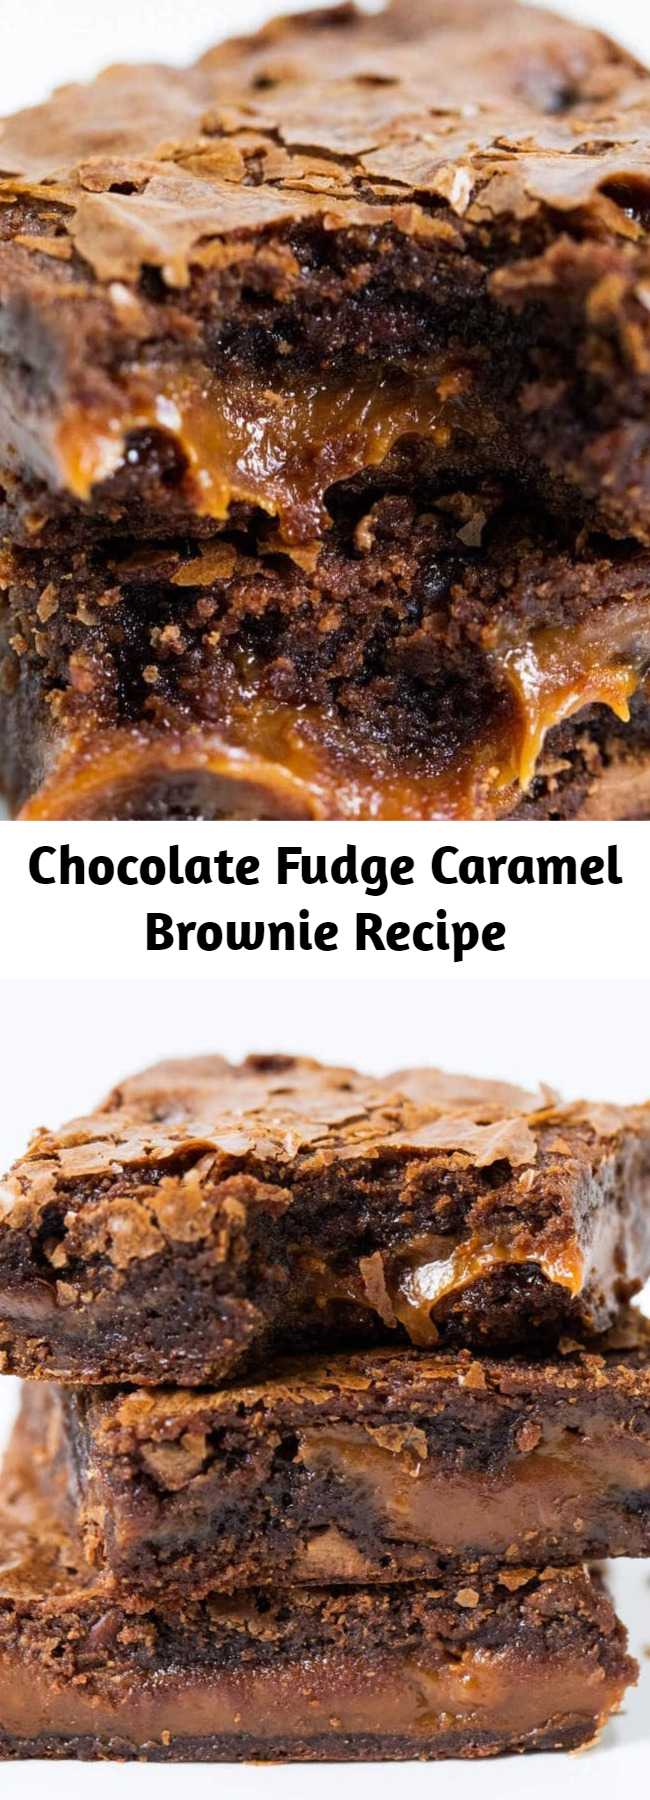 Chocolate Fudge Caramel Brownies - Easy to make brownies that are loaded with chocolate chips and layers of gooey caramel. Rich, chewy and simply amazing!